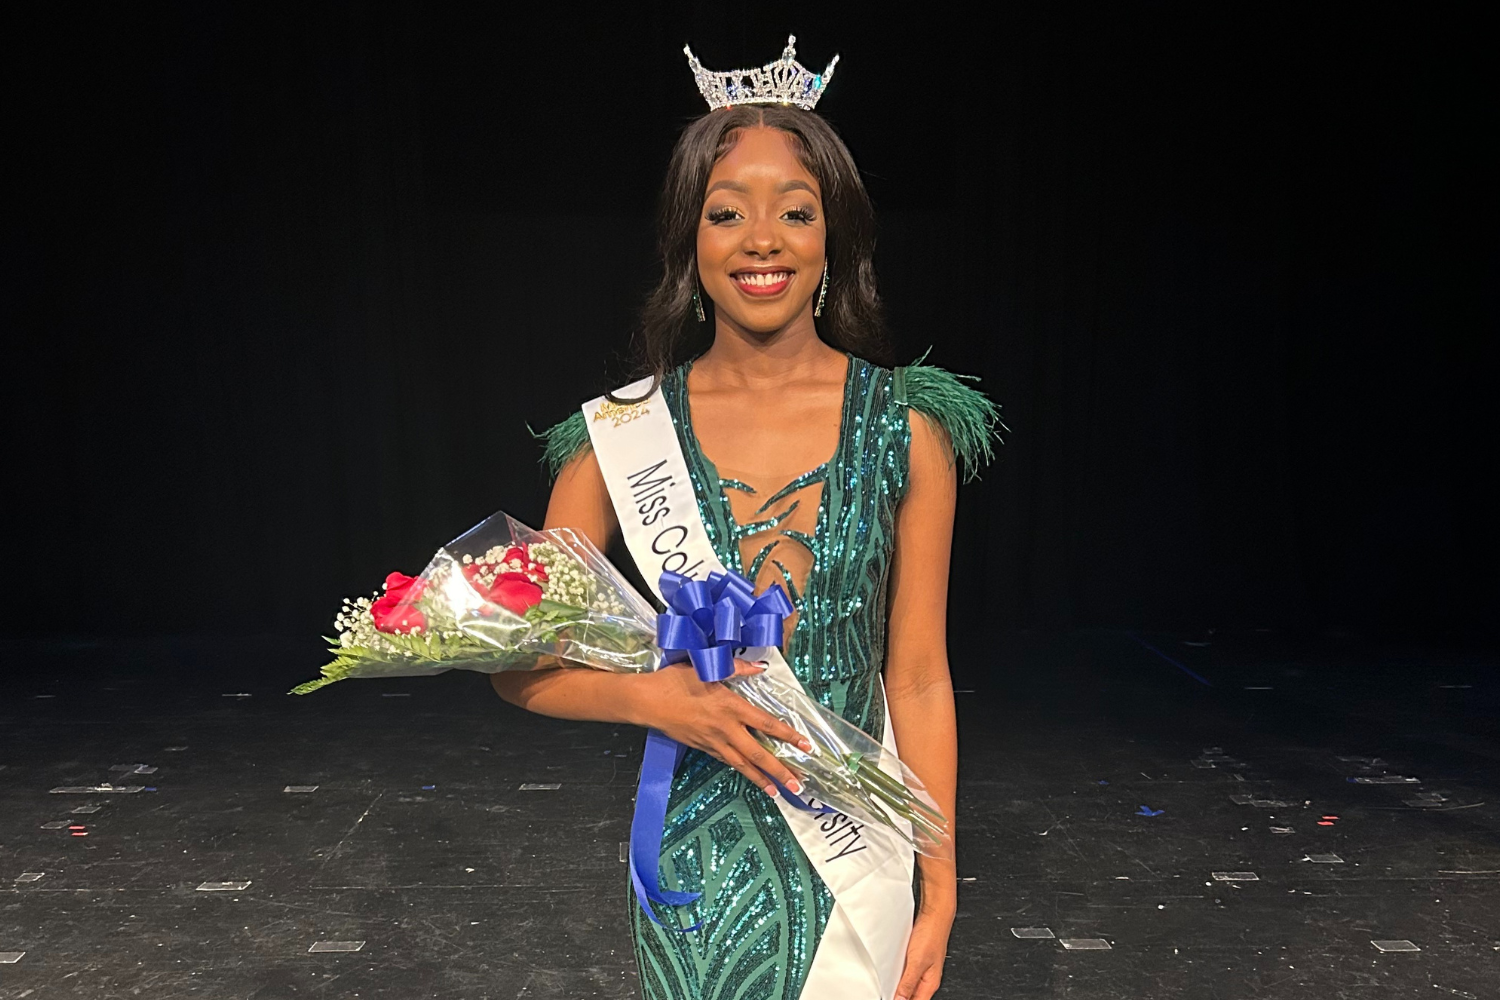 Photo of Kennedy Larkin in a pageant gown wearing a tiara and Miss Columbus State University sash and holding a bouquet of flowers